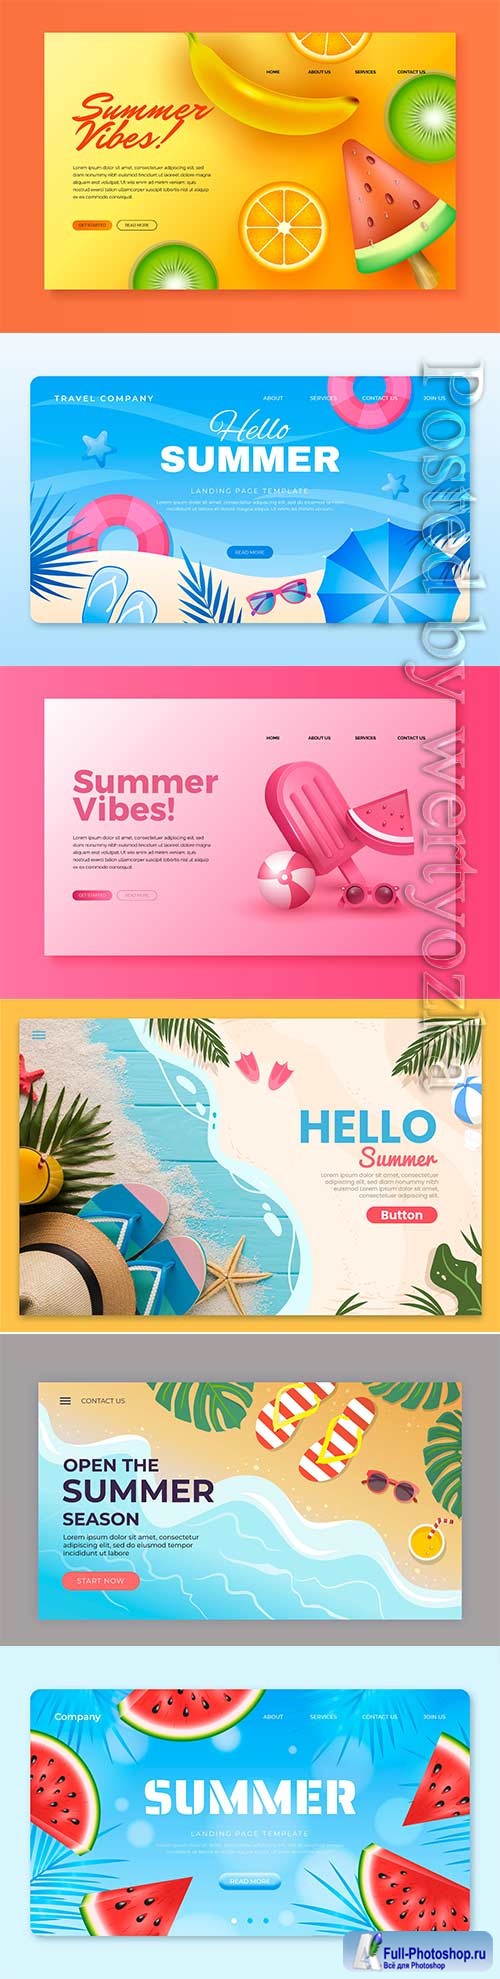 Realistic summer landing page vector template